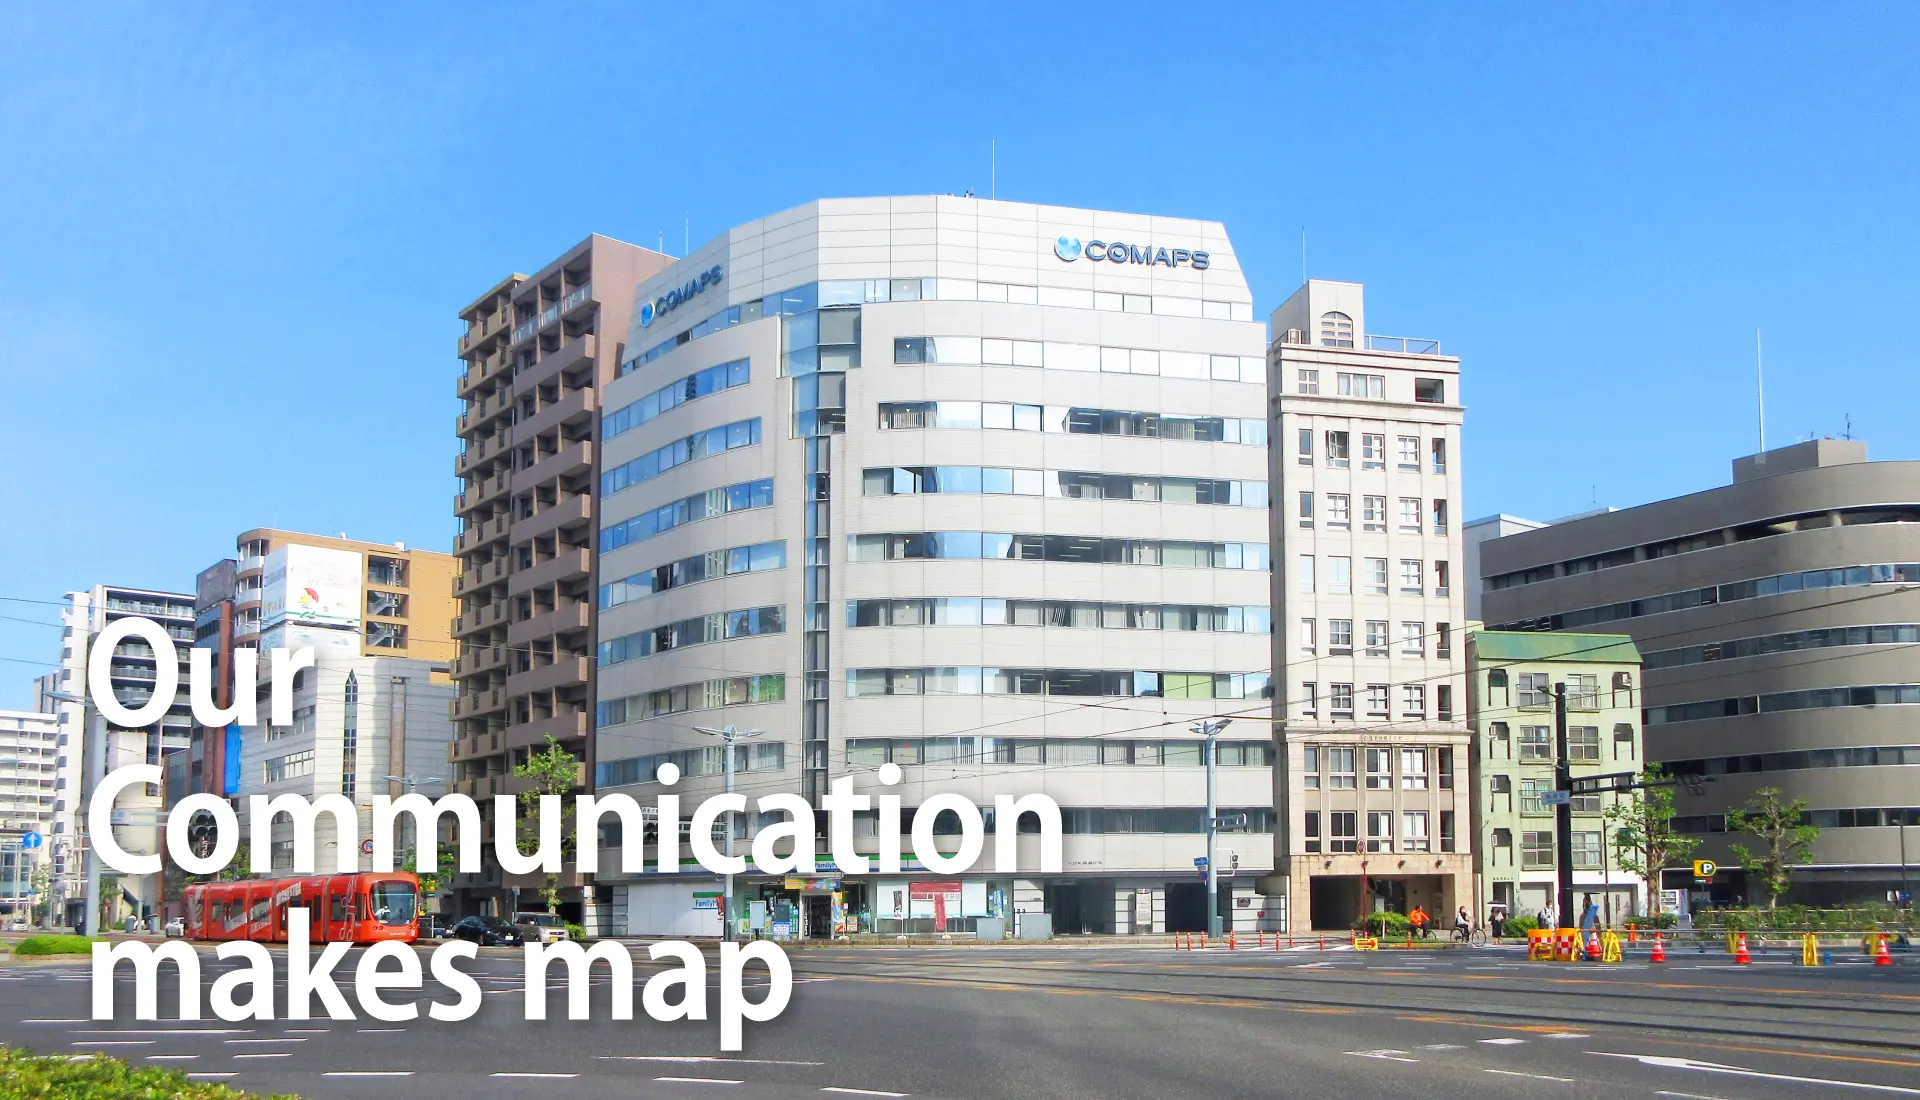 Our Communication makes map